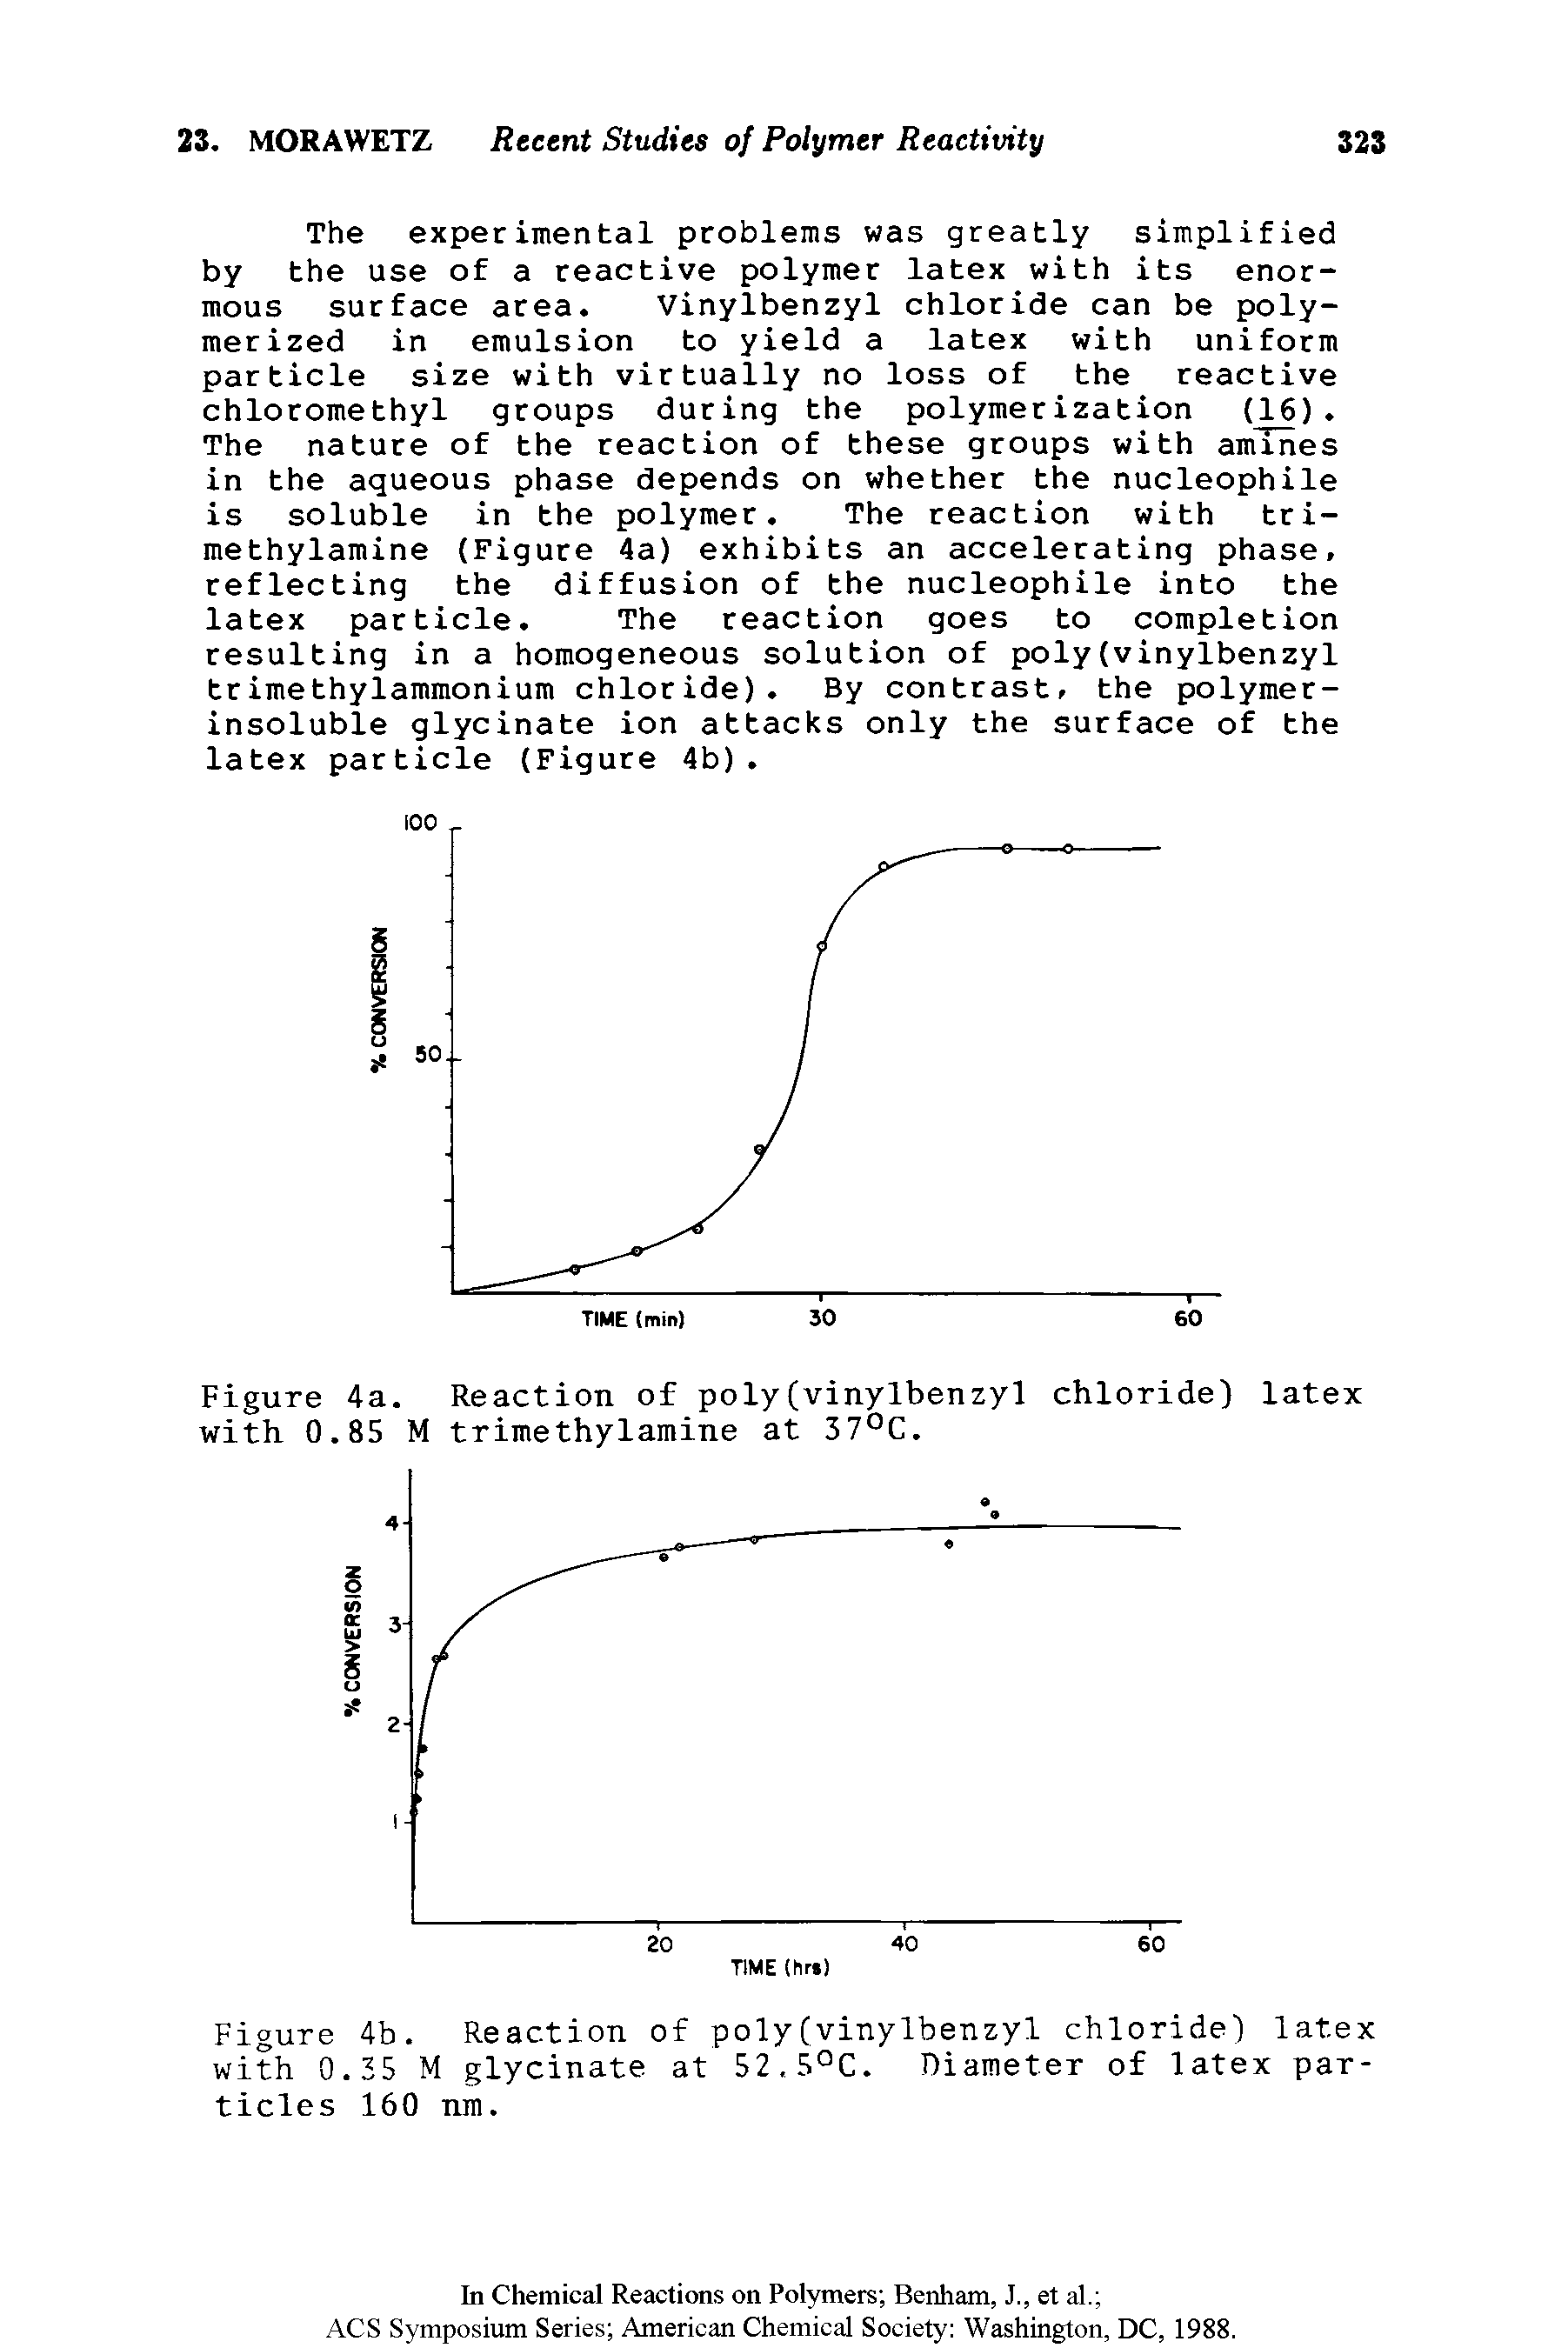 Figure 4a. Reaction of poly(vinylbenzyl chloride) latex with 0.85 M trimethylamine at 37°C.